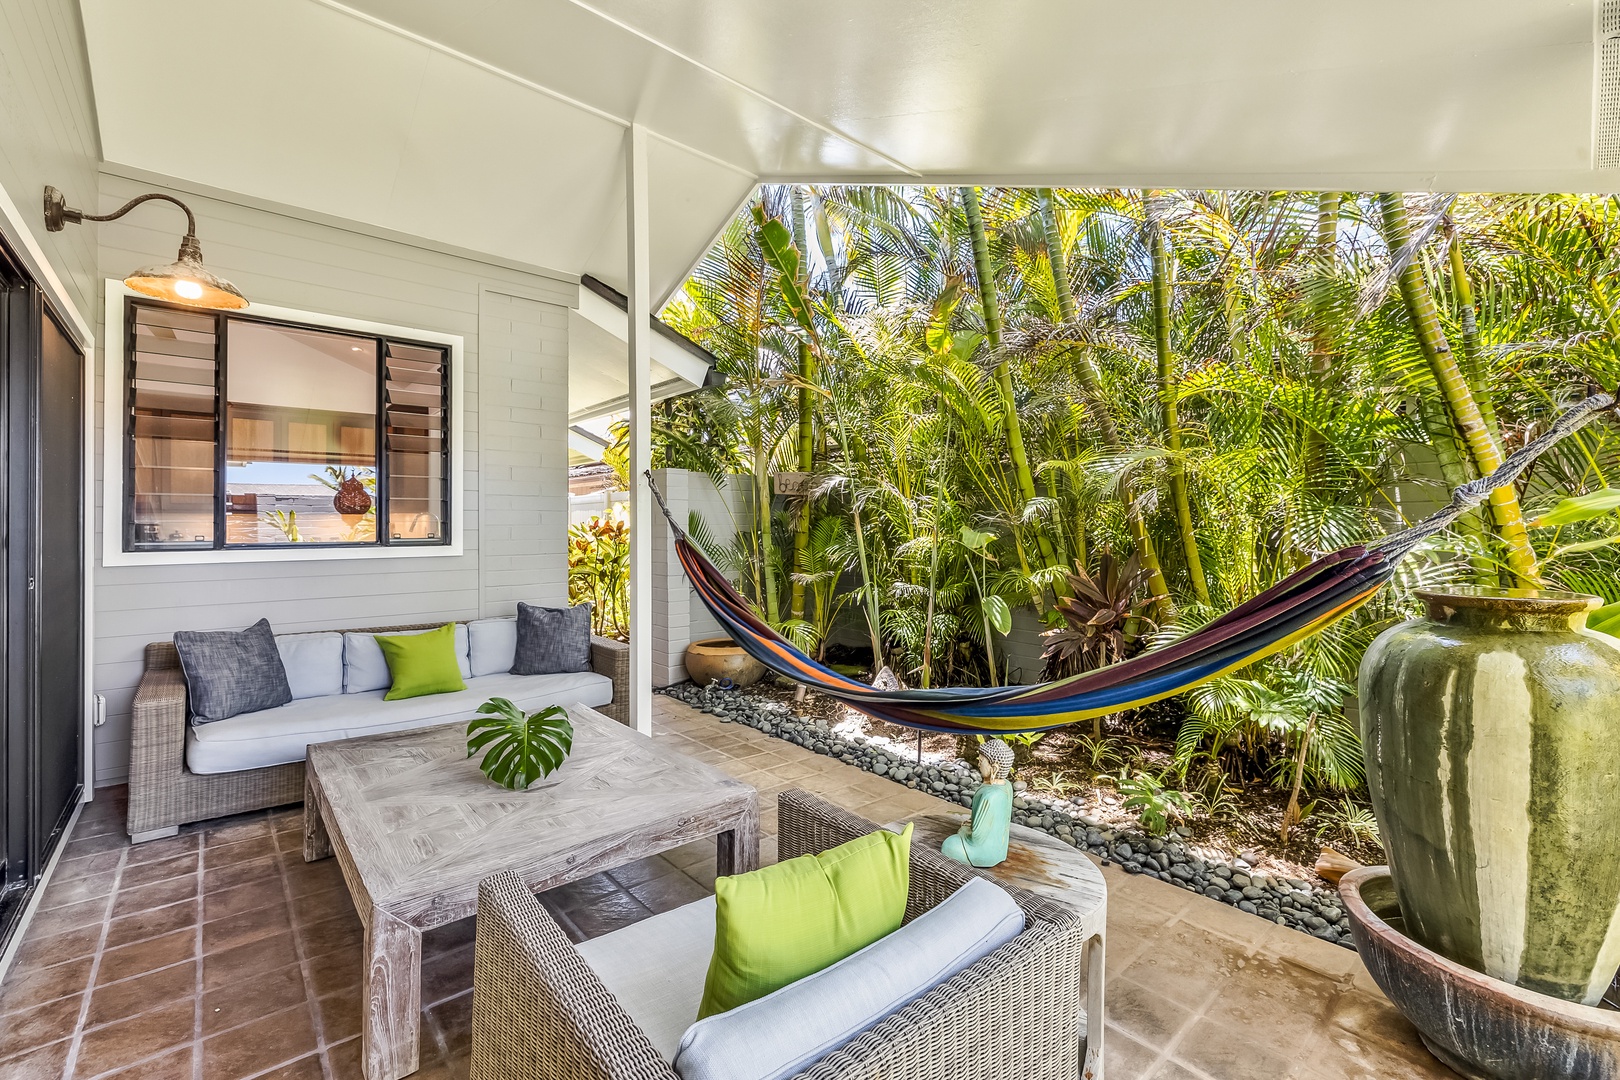 Kailua Vacation Rentals, Hale Ohana - Even more shaded seating with a hammock